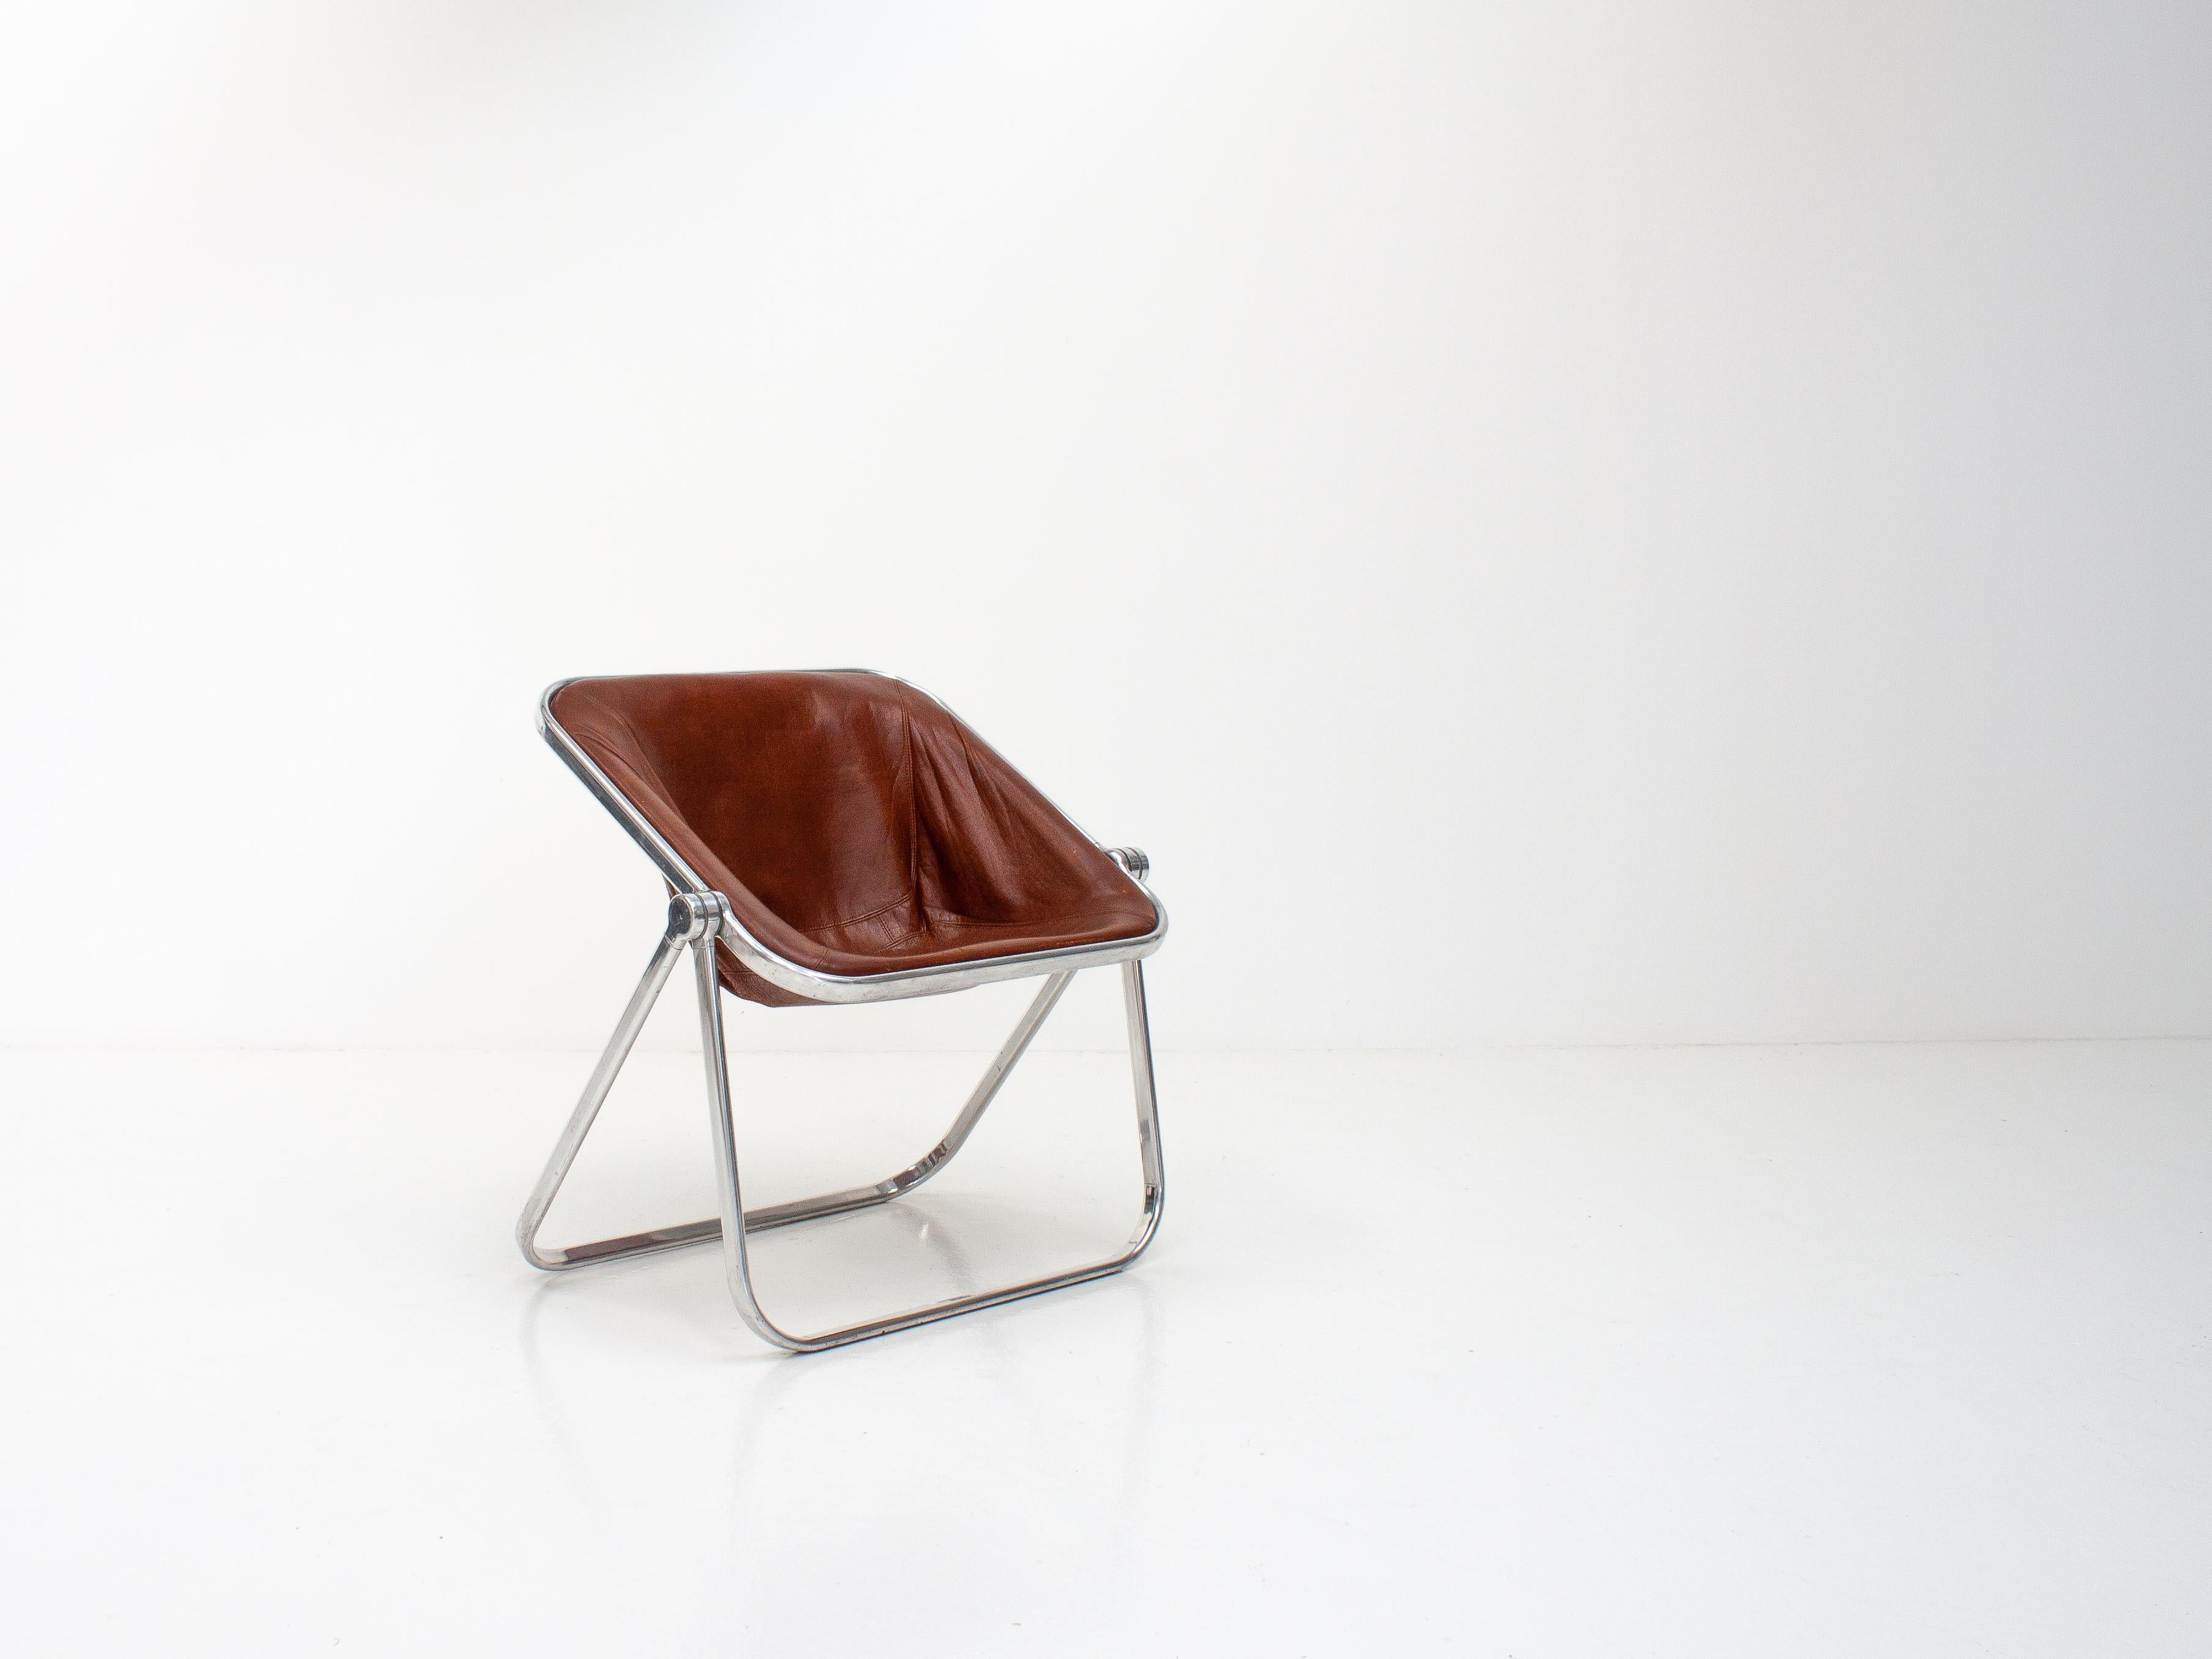 20th Century Plona Folding Lounge Chair by Giancarlo Piretti for Castelli in 1969, Italy